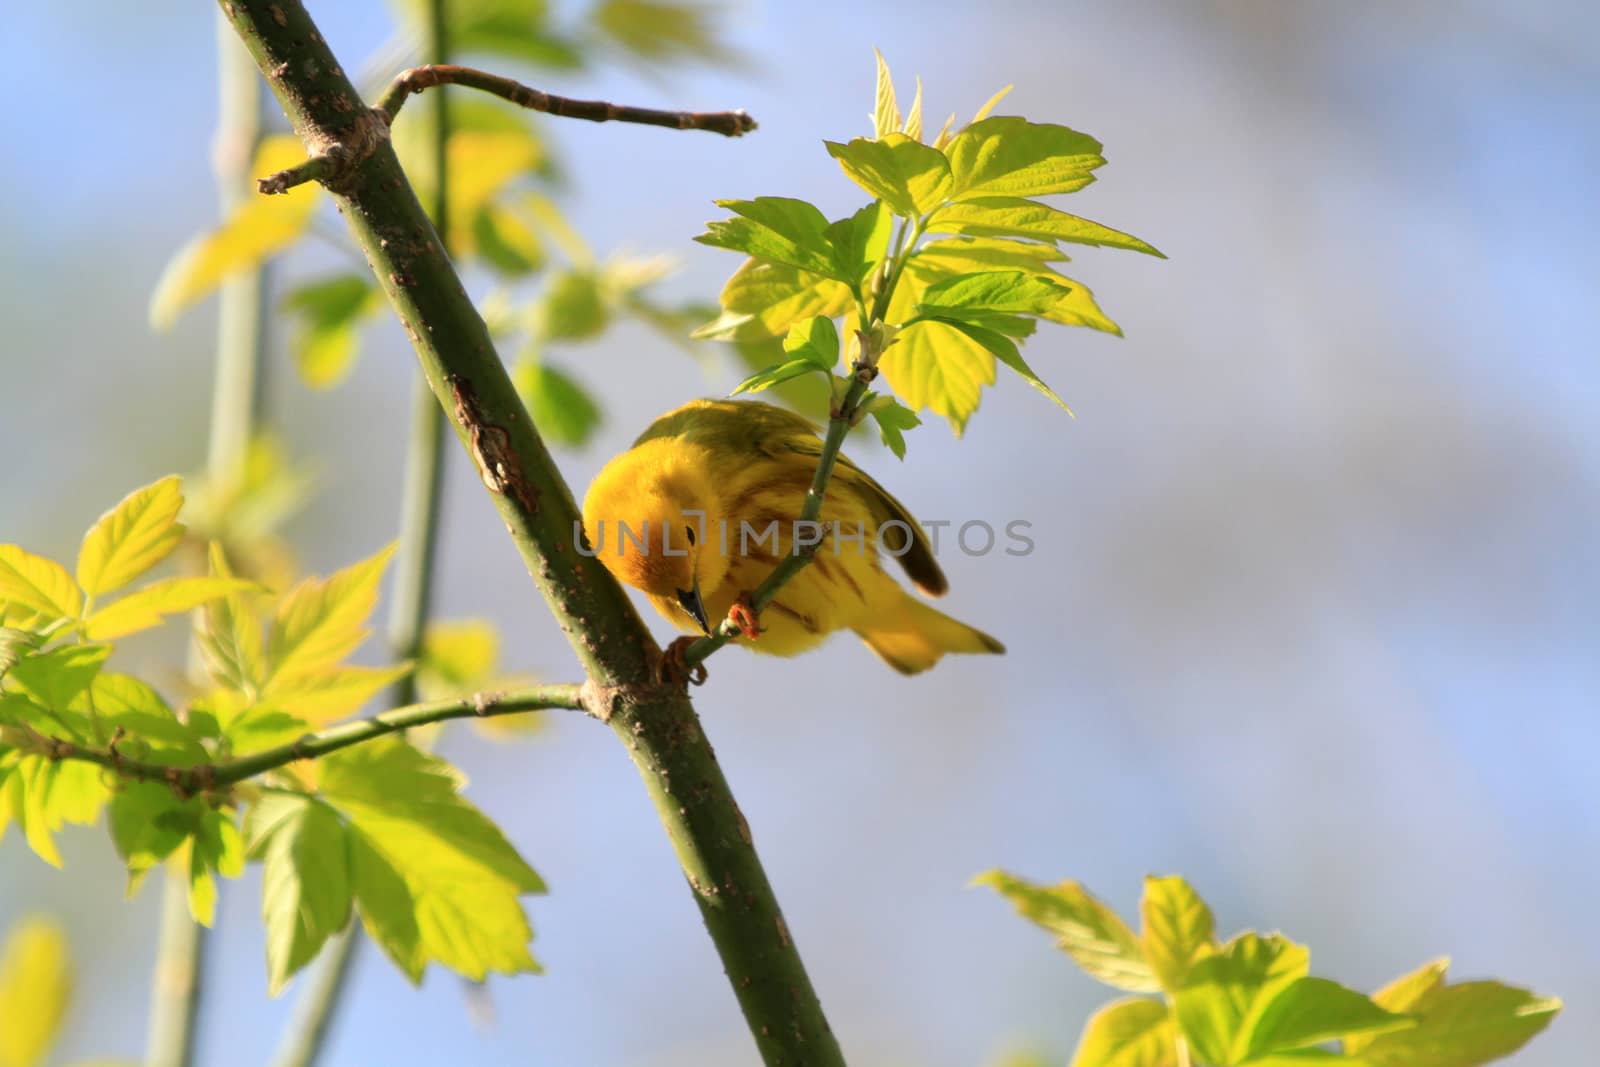 Yellow Warbler feeding on insects in early spring